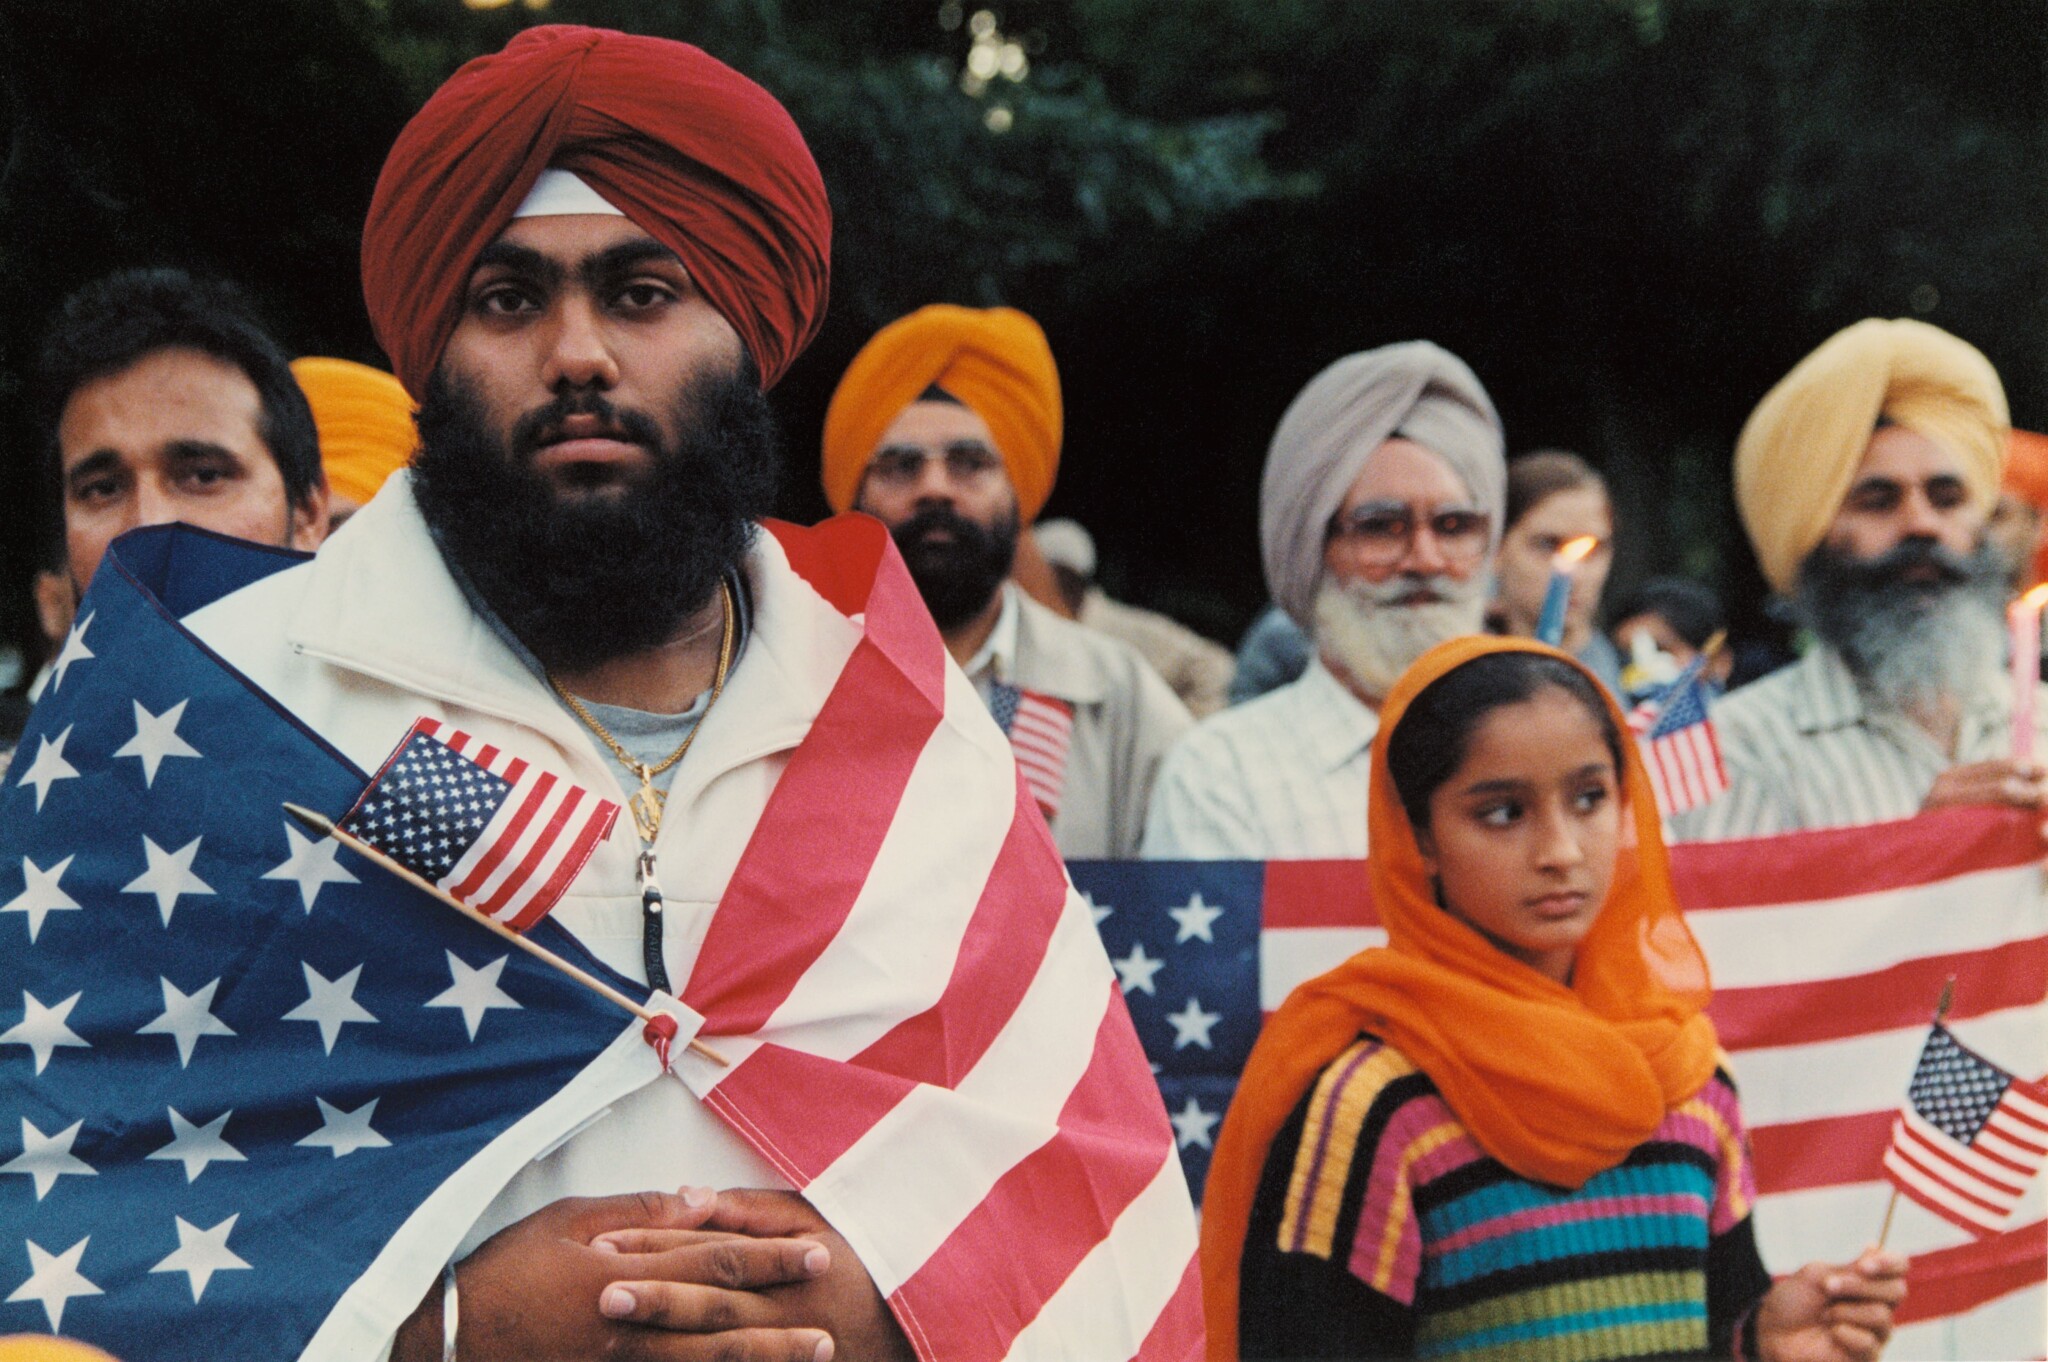 A Sikh American man stands with an American flag wrapped around his shoulders, with more Sikh men and a young Sikh woman in the background.